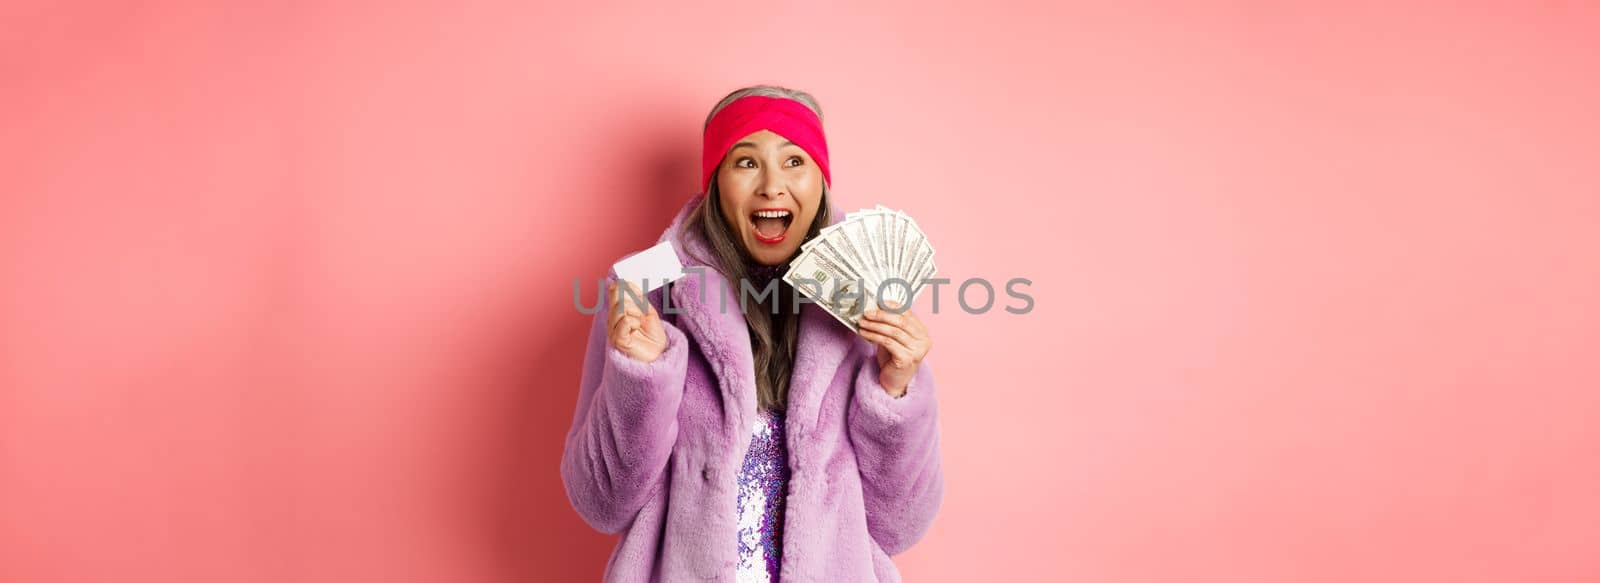 Shopping and fashion concept. Asian senior woman scream happy like winner, holding dollars money and plastic credit card, looking excited, pink background.